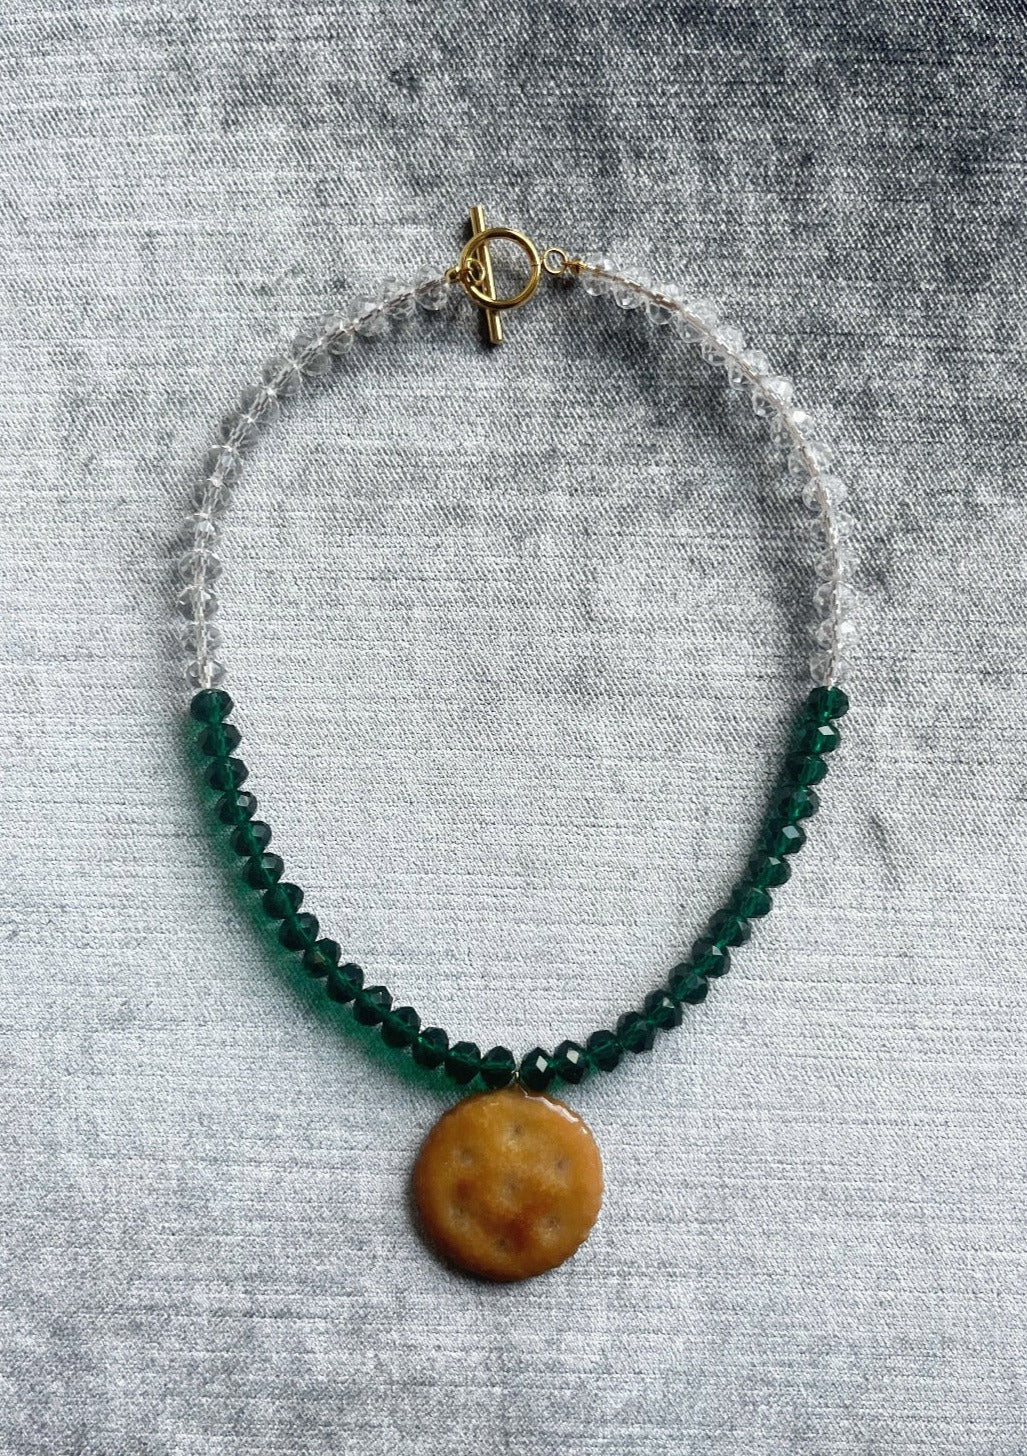 Resin dipped Ritz Cracker pendant on white and green beaded necklace with gold clasp.